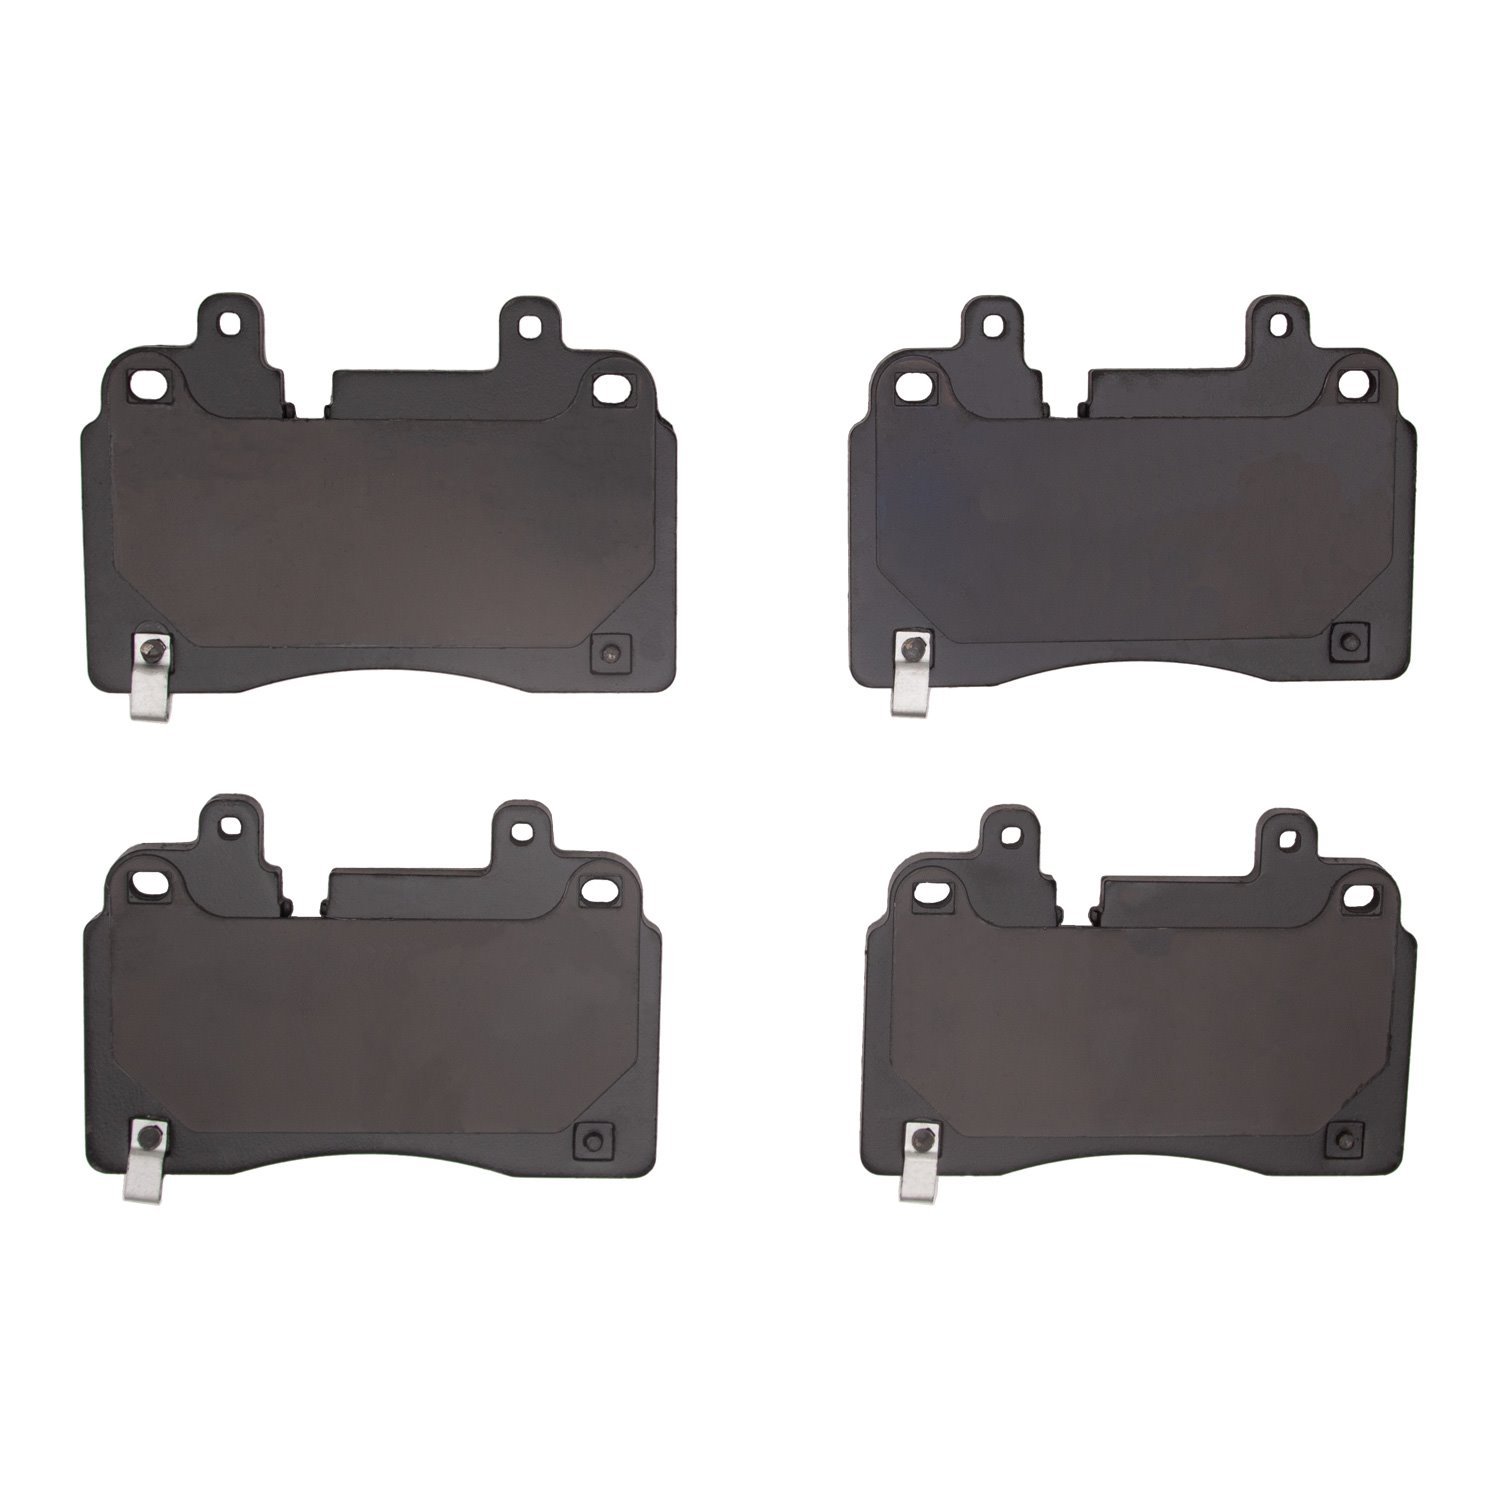 1310-2251-00 3000-Series Ceramic Brake Pads, Fits Select GM, Position: Front